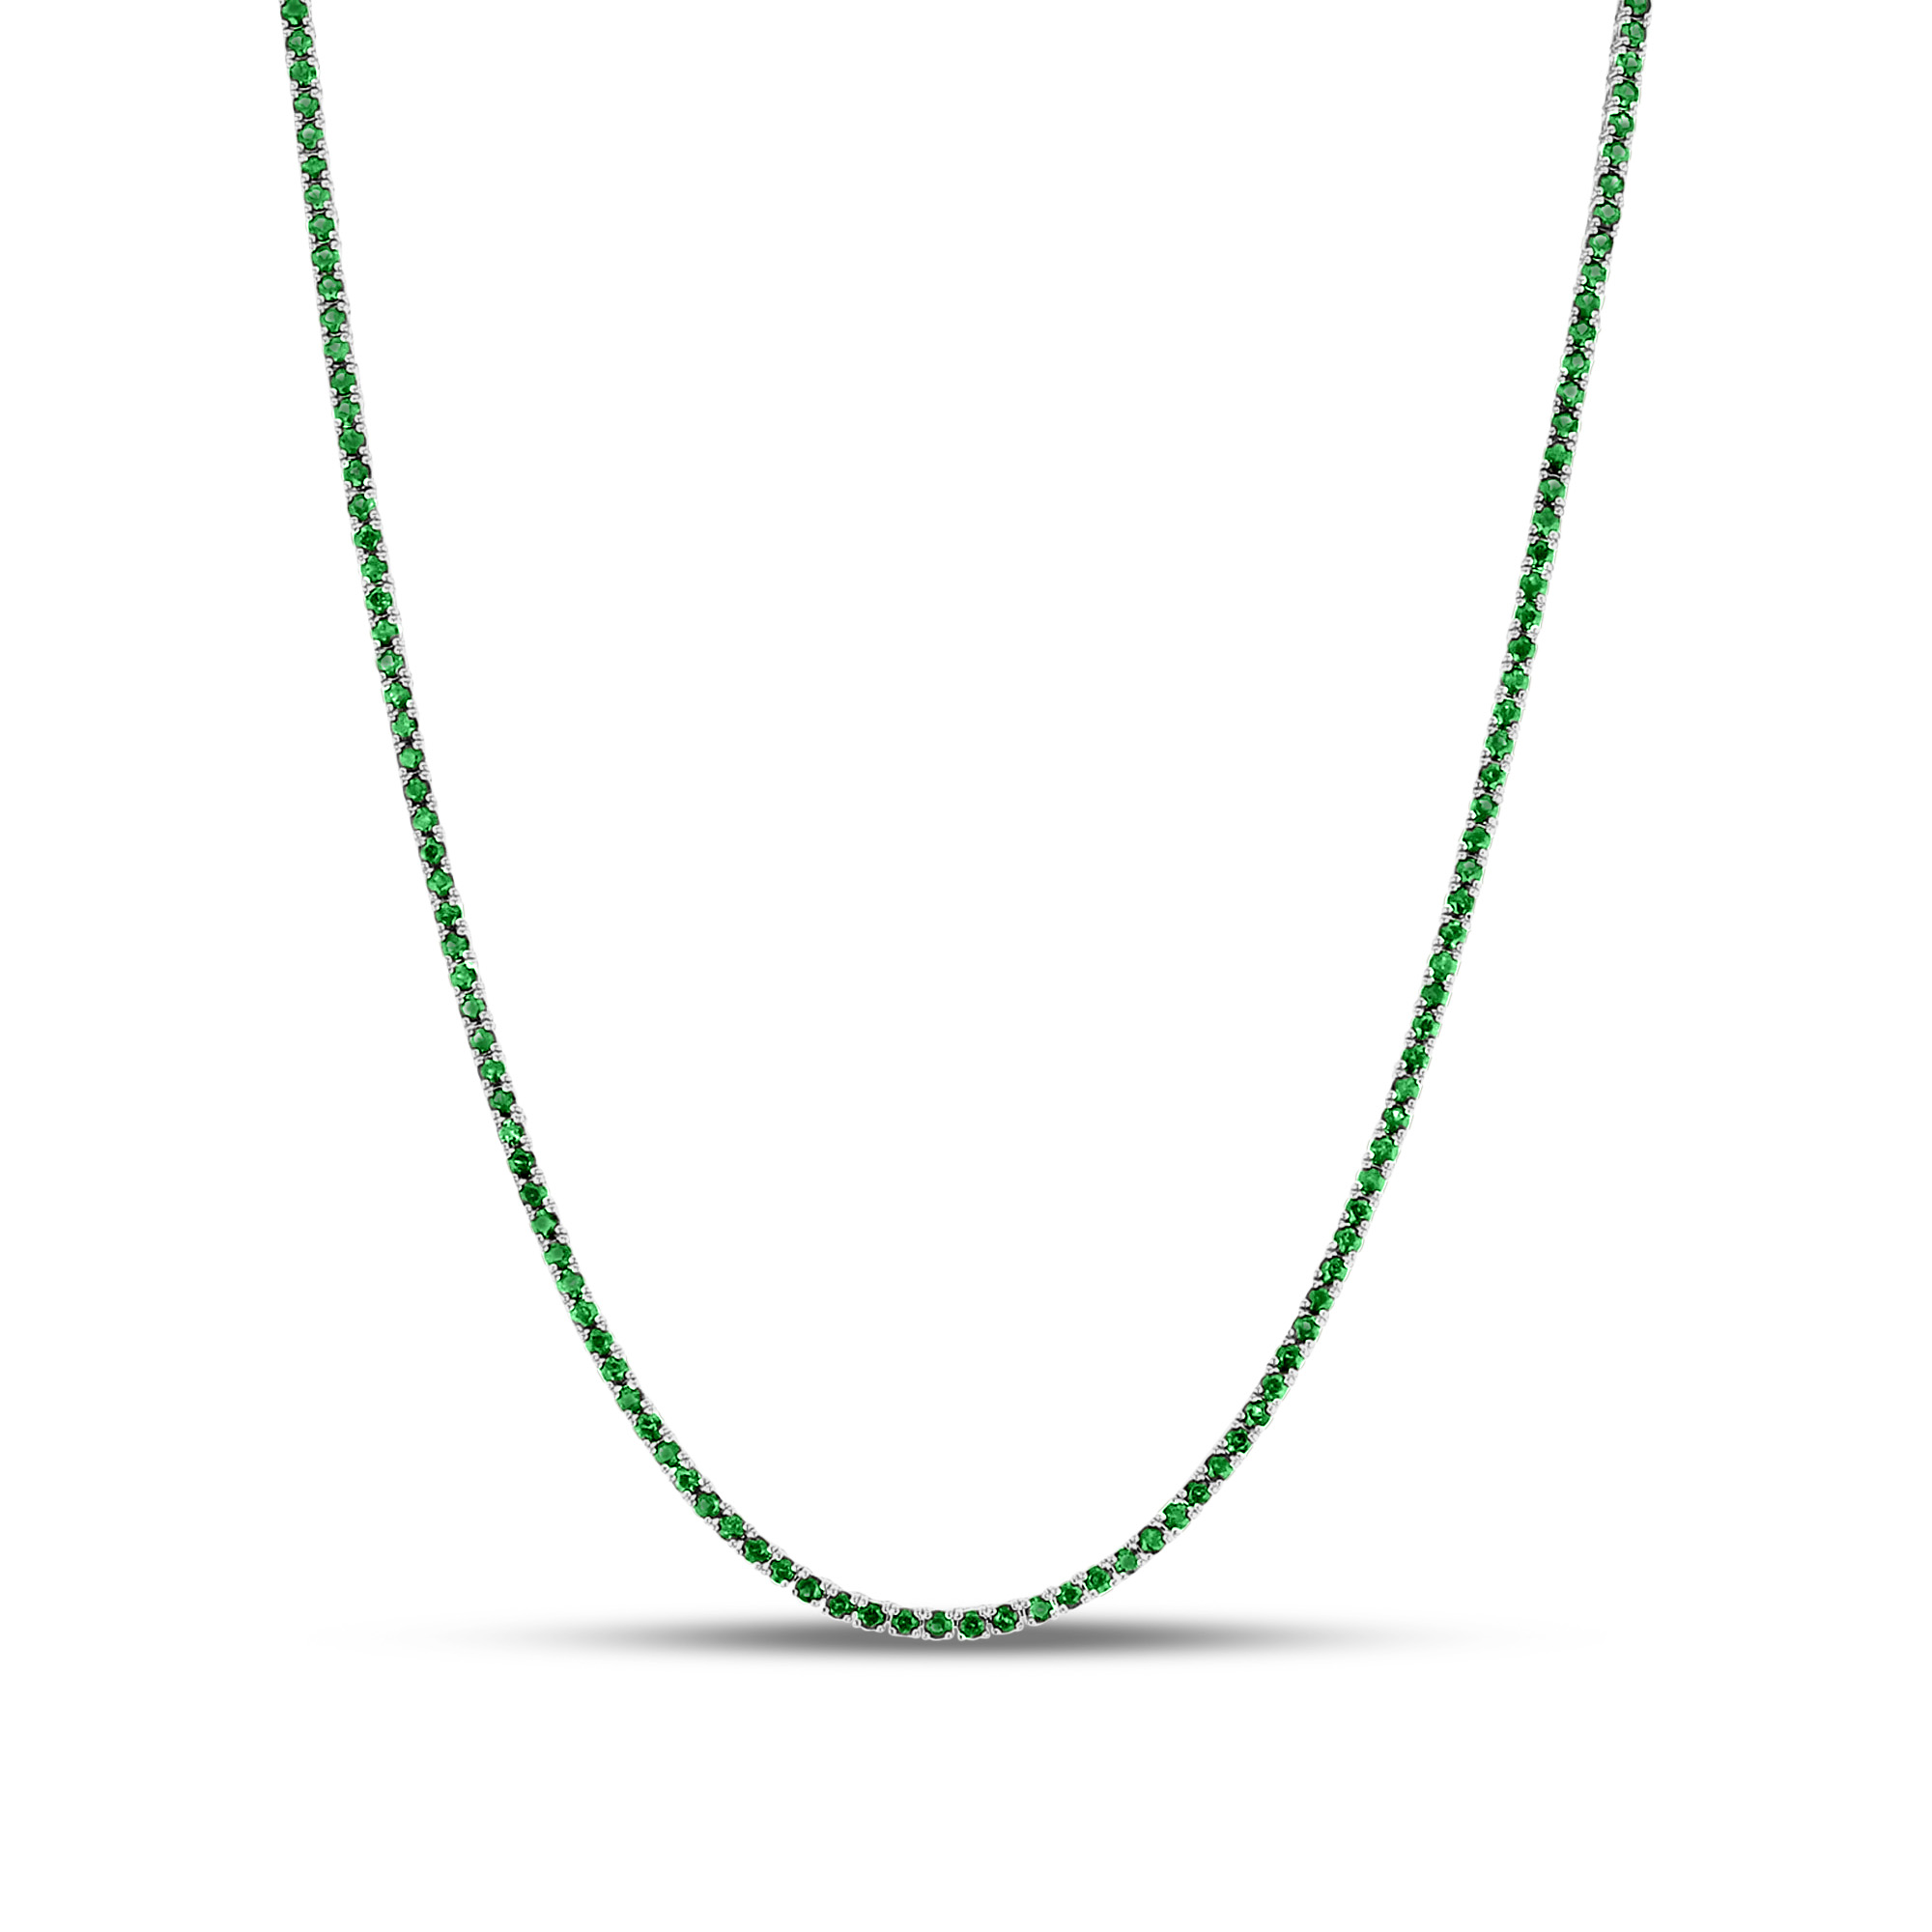 View 7.00ctw Emerald Tennis Necklace in 17 Inch in 14k White Gold